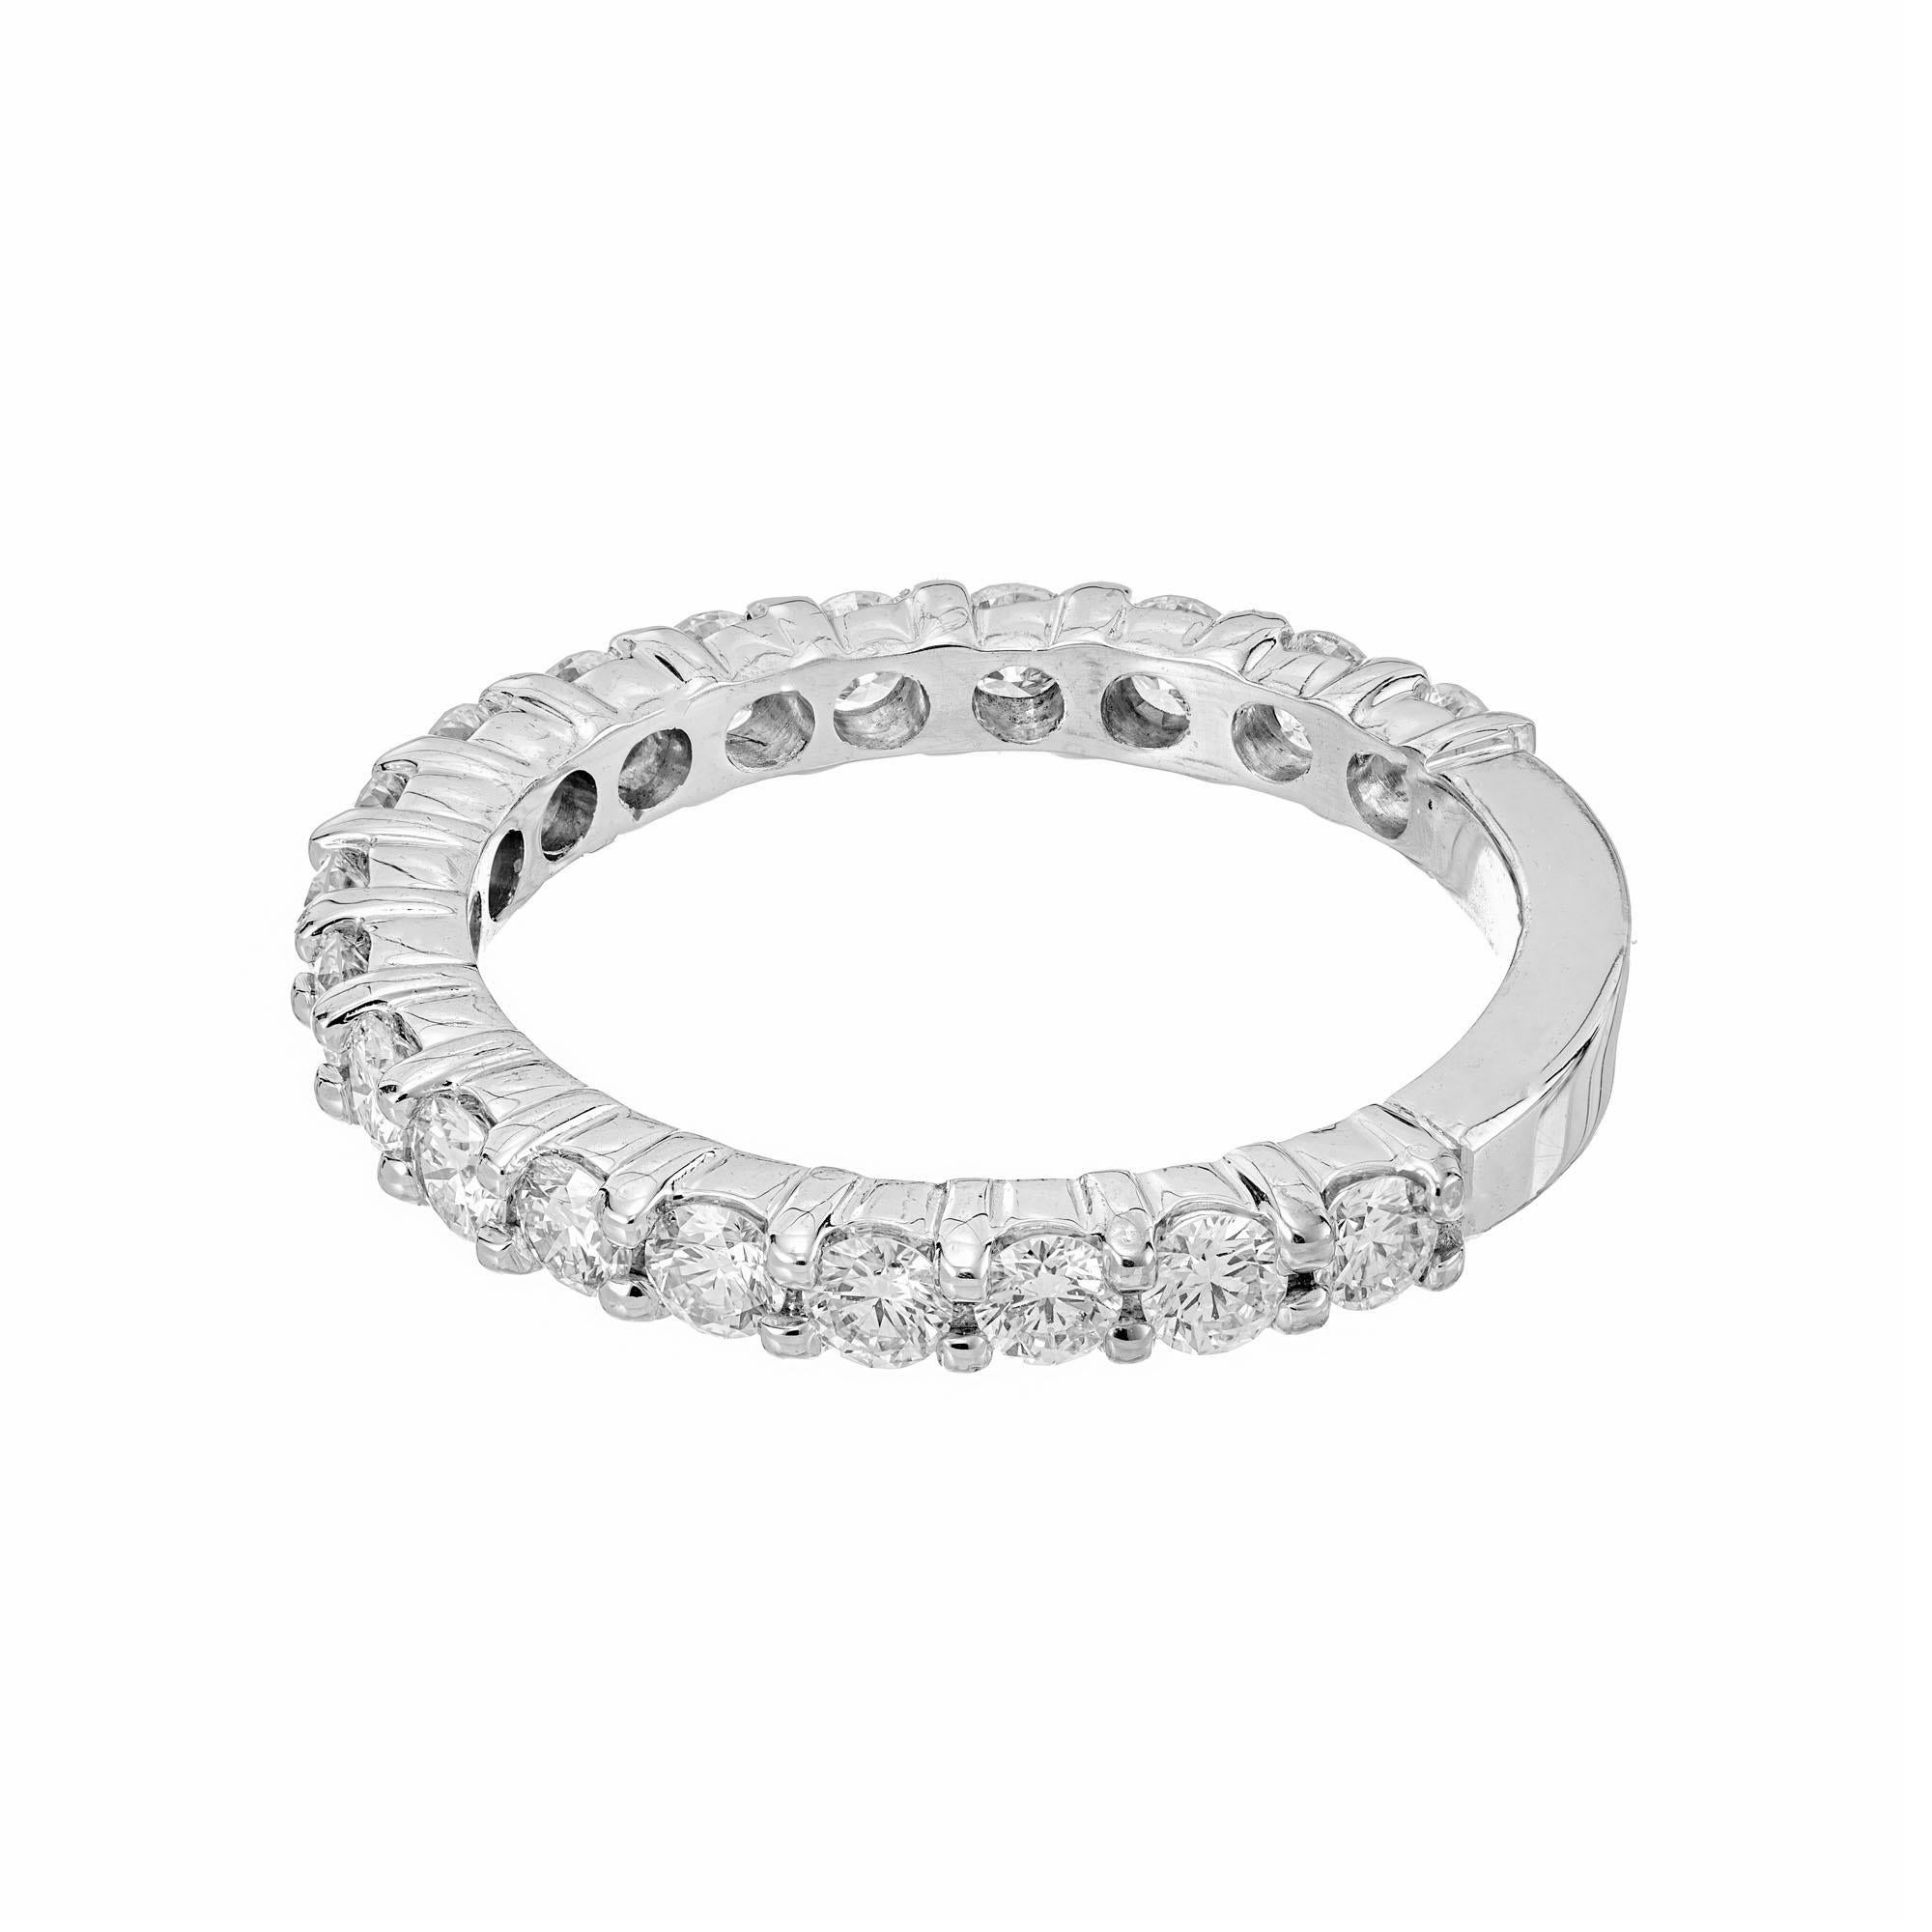 Diamond wedding band ring. 19 round brilliant cut diamonds in a 14k white gold common prong setting. White diamonds go 3/4 of a way around with a sizing bar at the bottom.

19 round brilliant cut diamonds, G VS SI approx. .76cts
Size 6 and